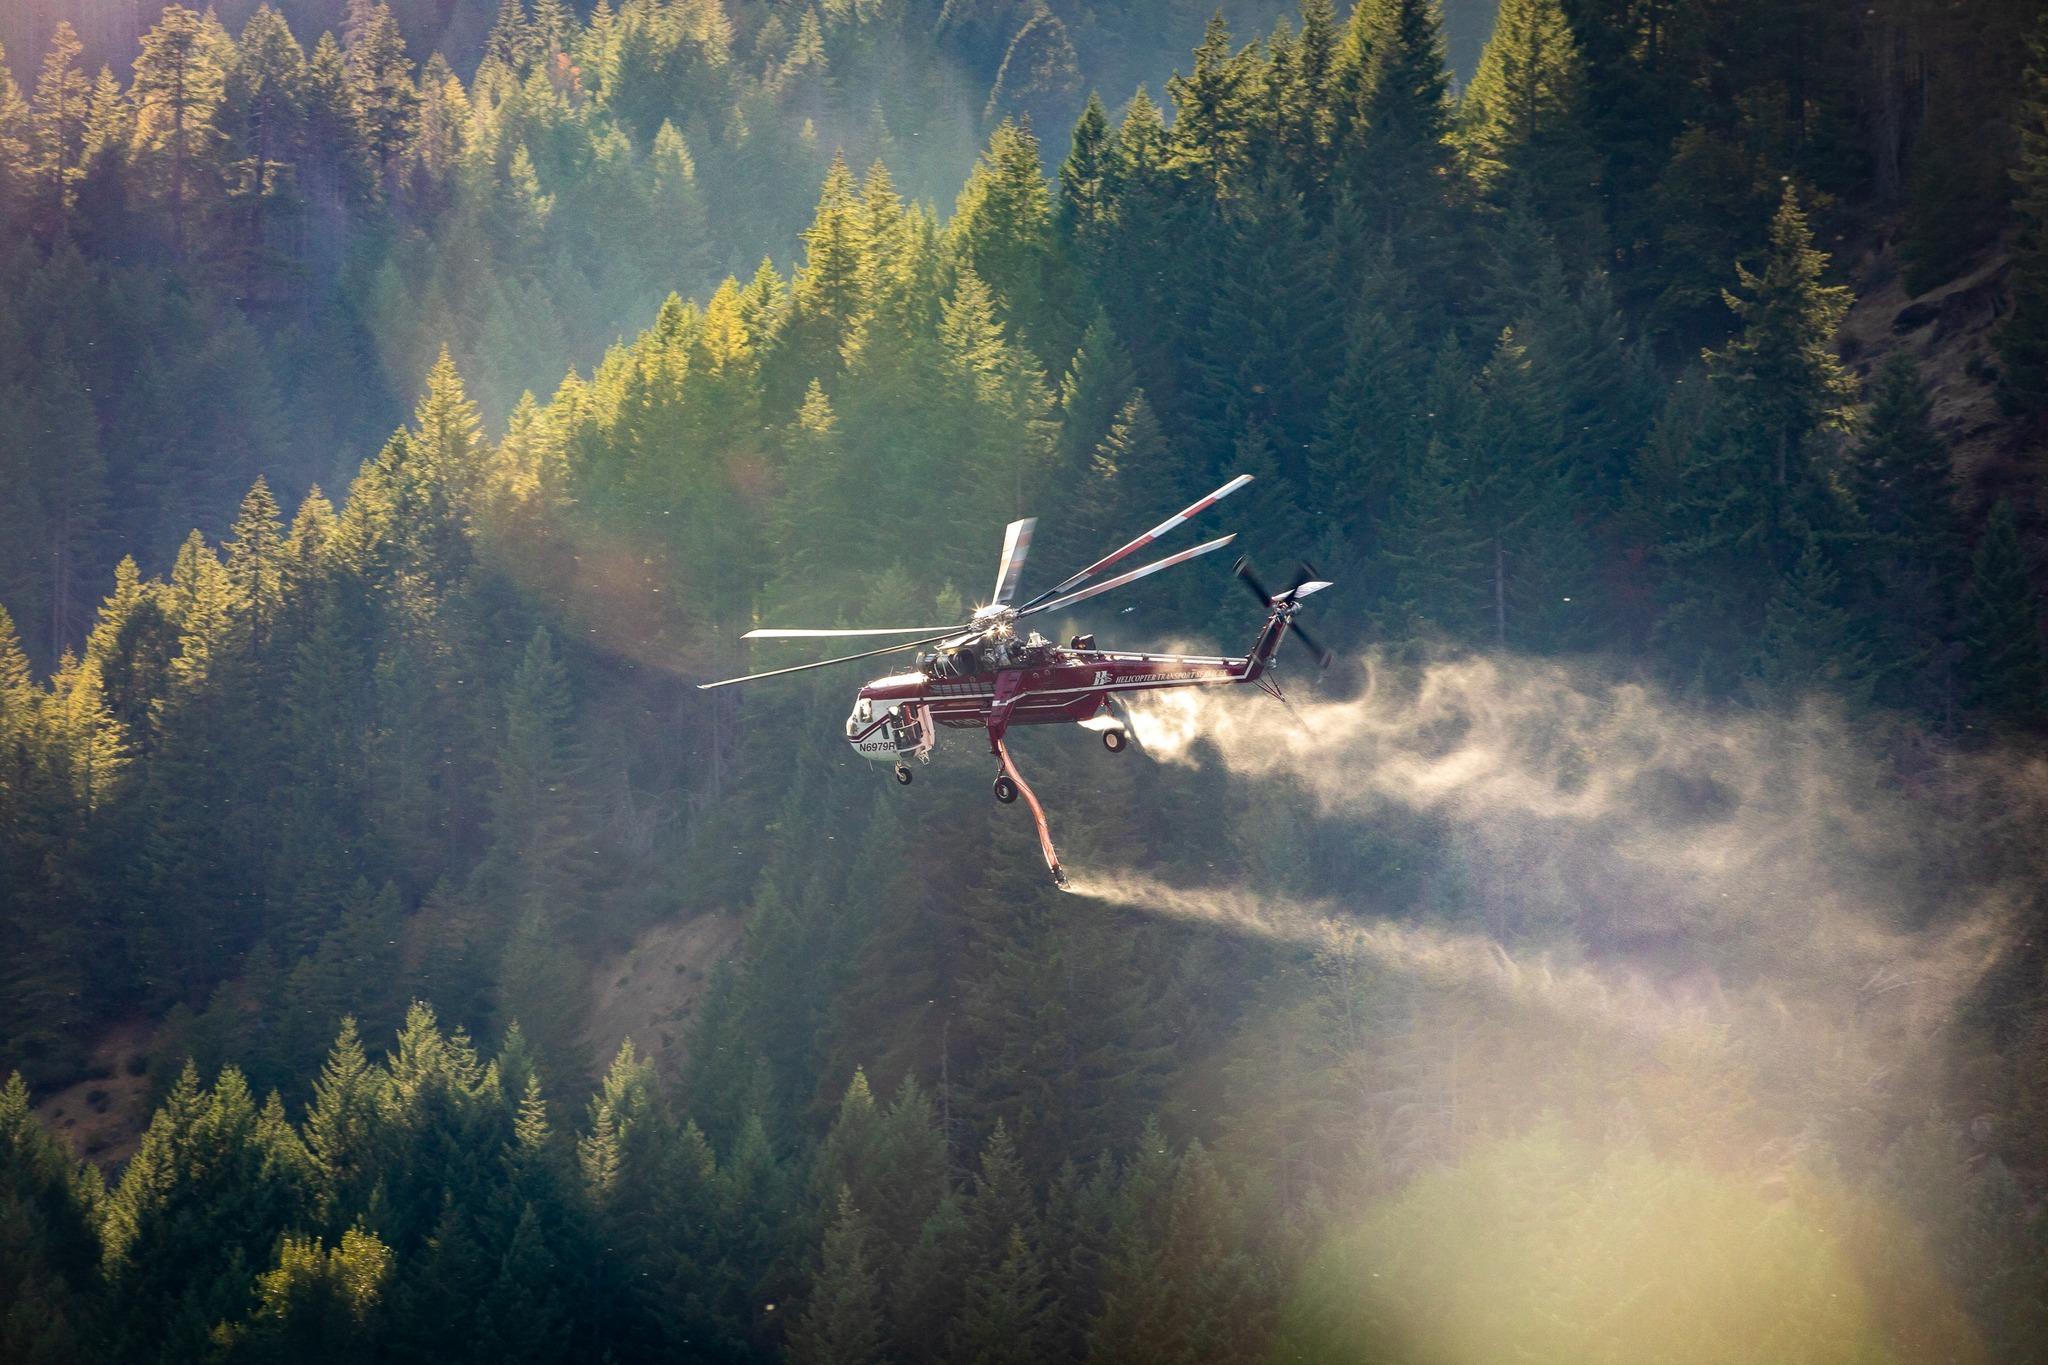 A helicopter drops water onto the fire